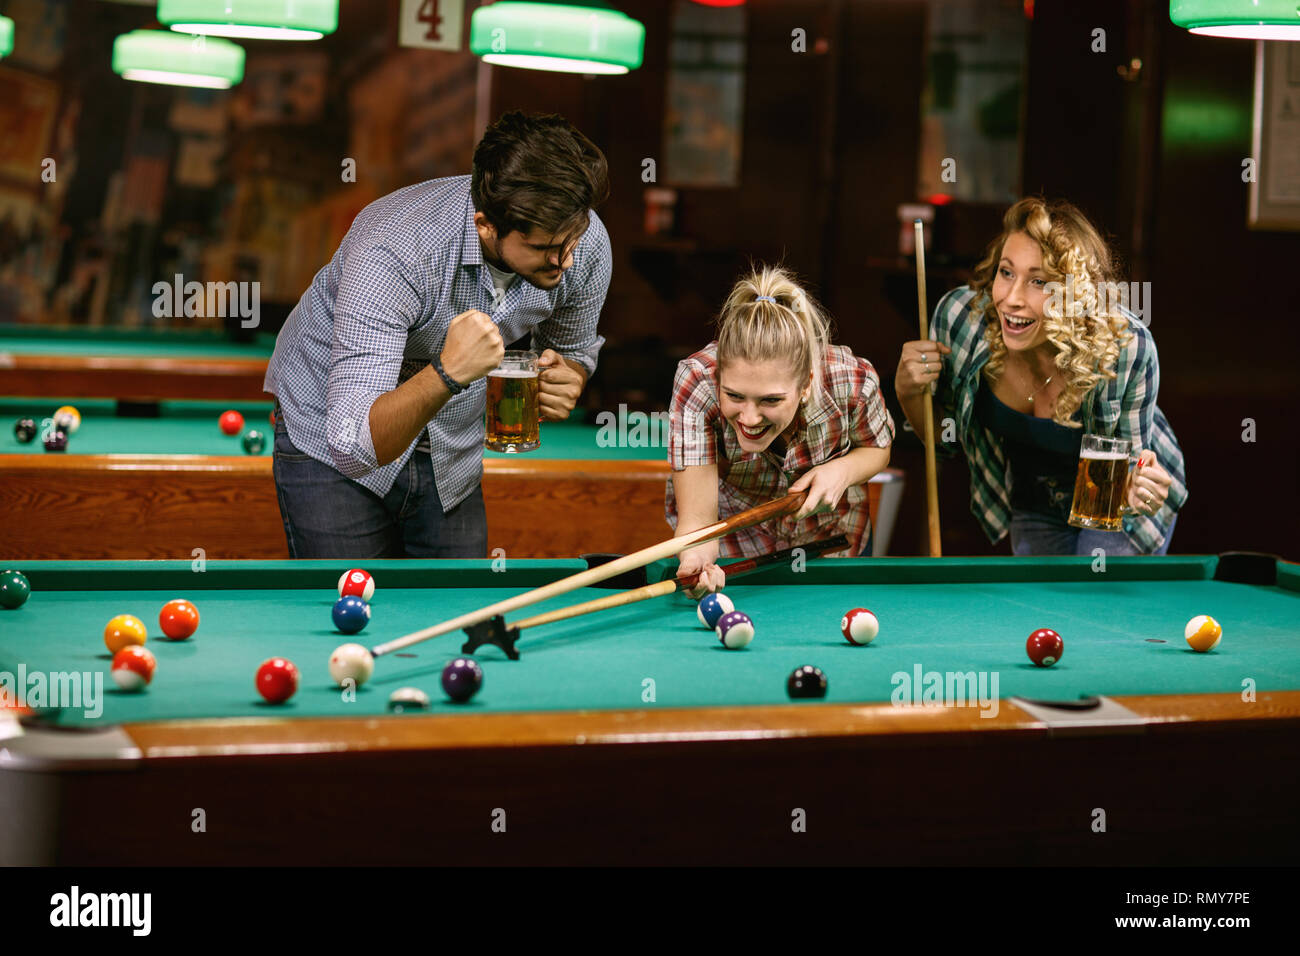 Group of friends playing pool game in pub Stock Photo